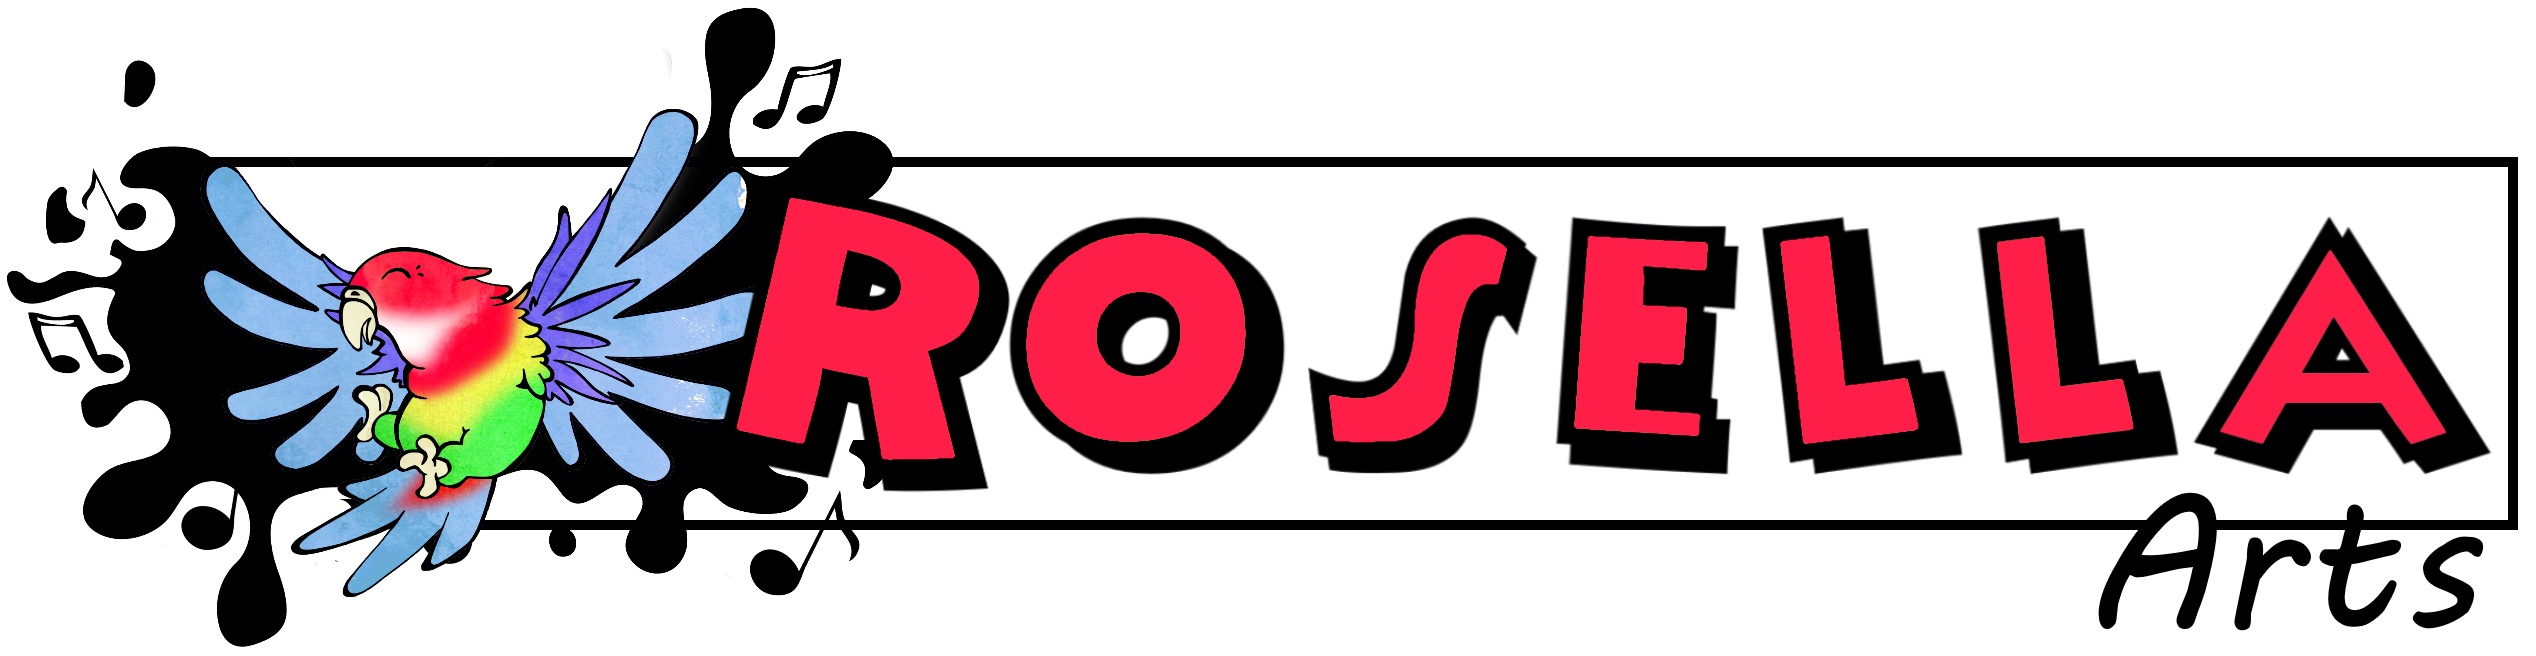 Fin rosella Red with bigger font logo